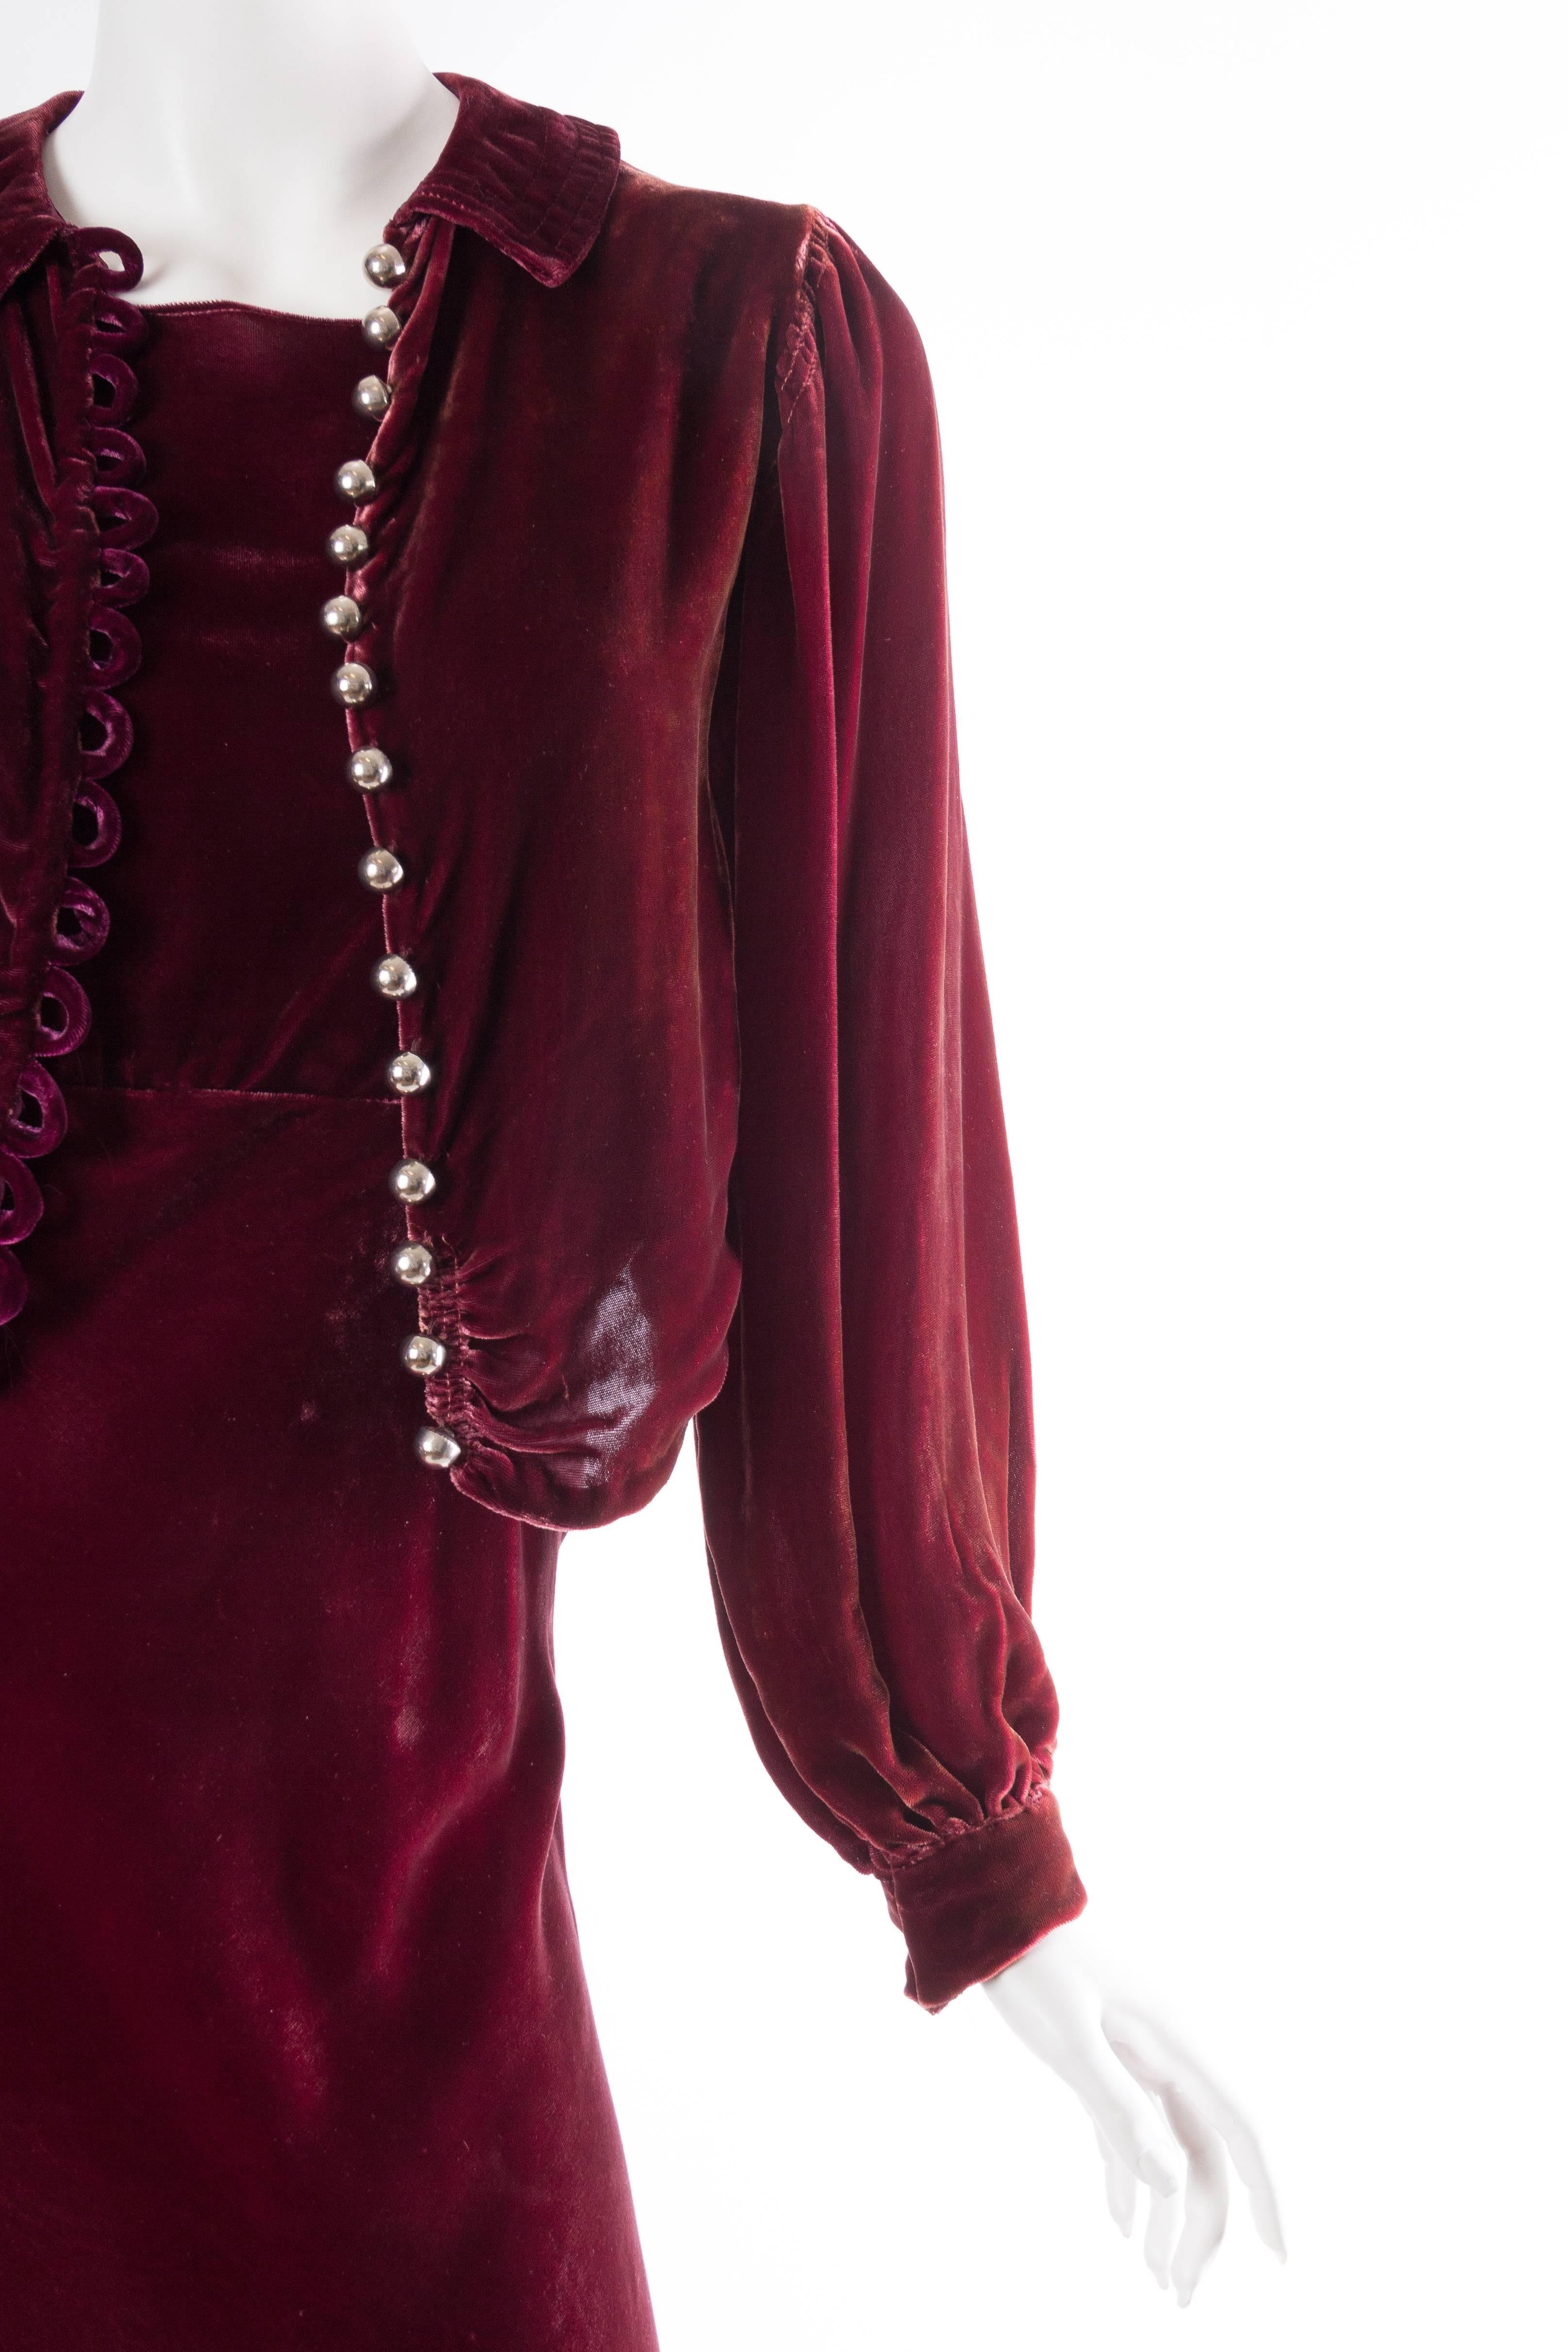 Women's Backless Silk Velvet Gown from the 1930s with Matching Jacket